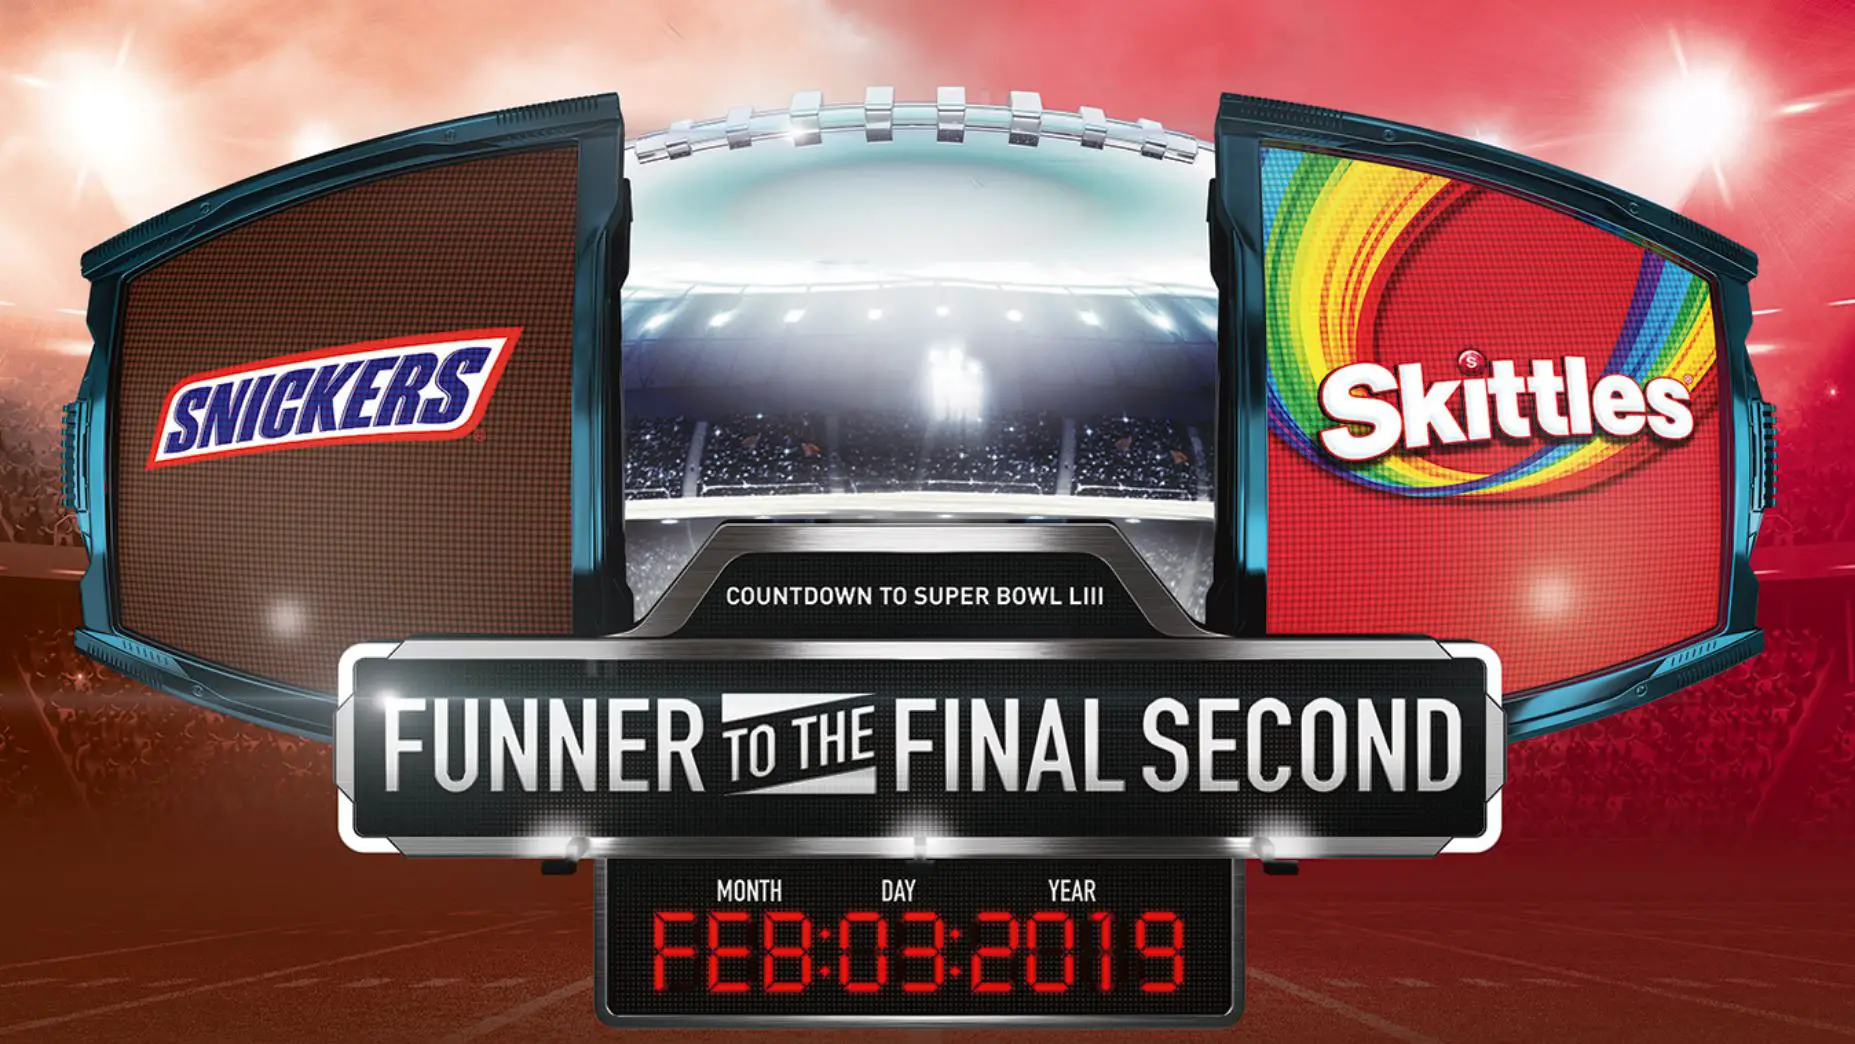 Play to win NFL prizes and be entered to win the grand prize, a trip for two to Super Bowl LIV in Miami in 2020 in the Snickers Skittles M&M's Funner to the Final Second Instant Win Game